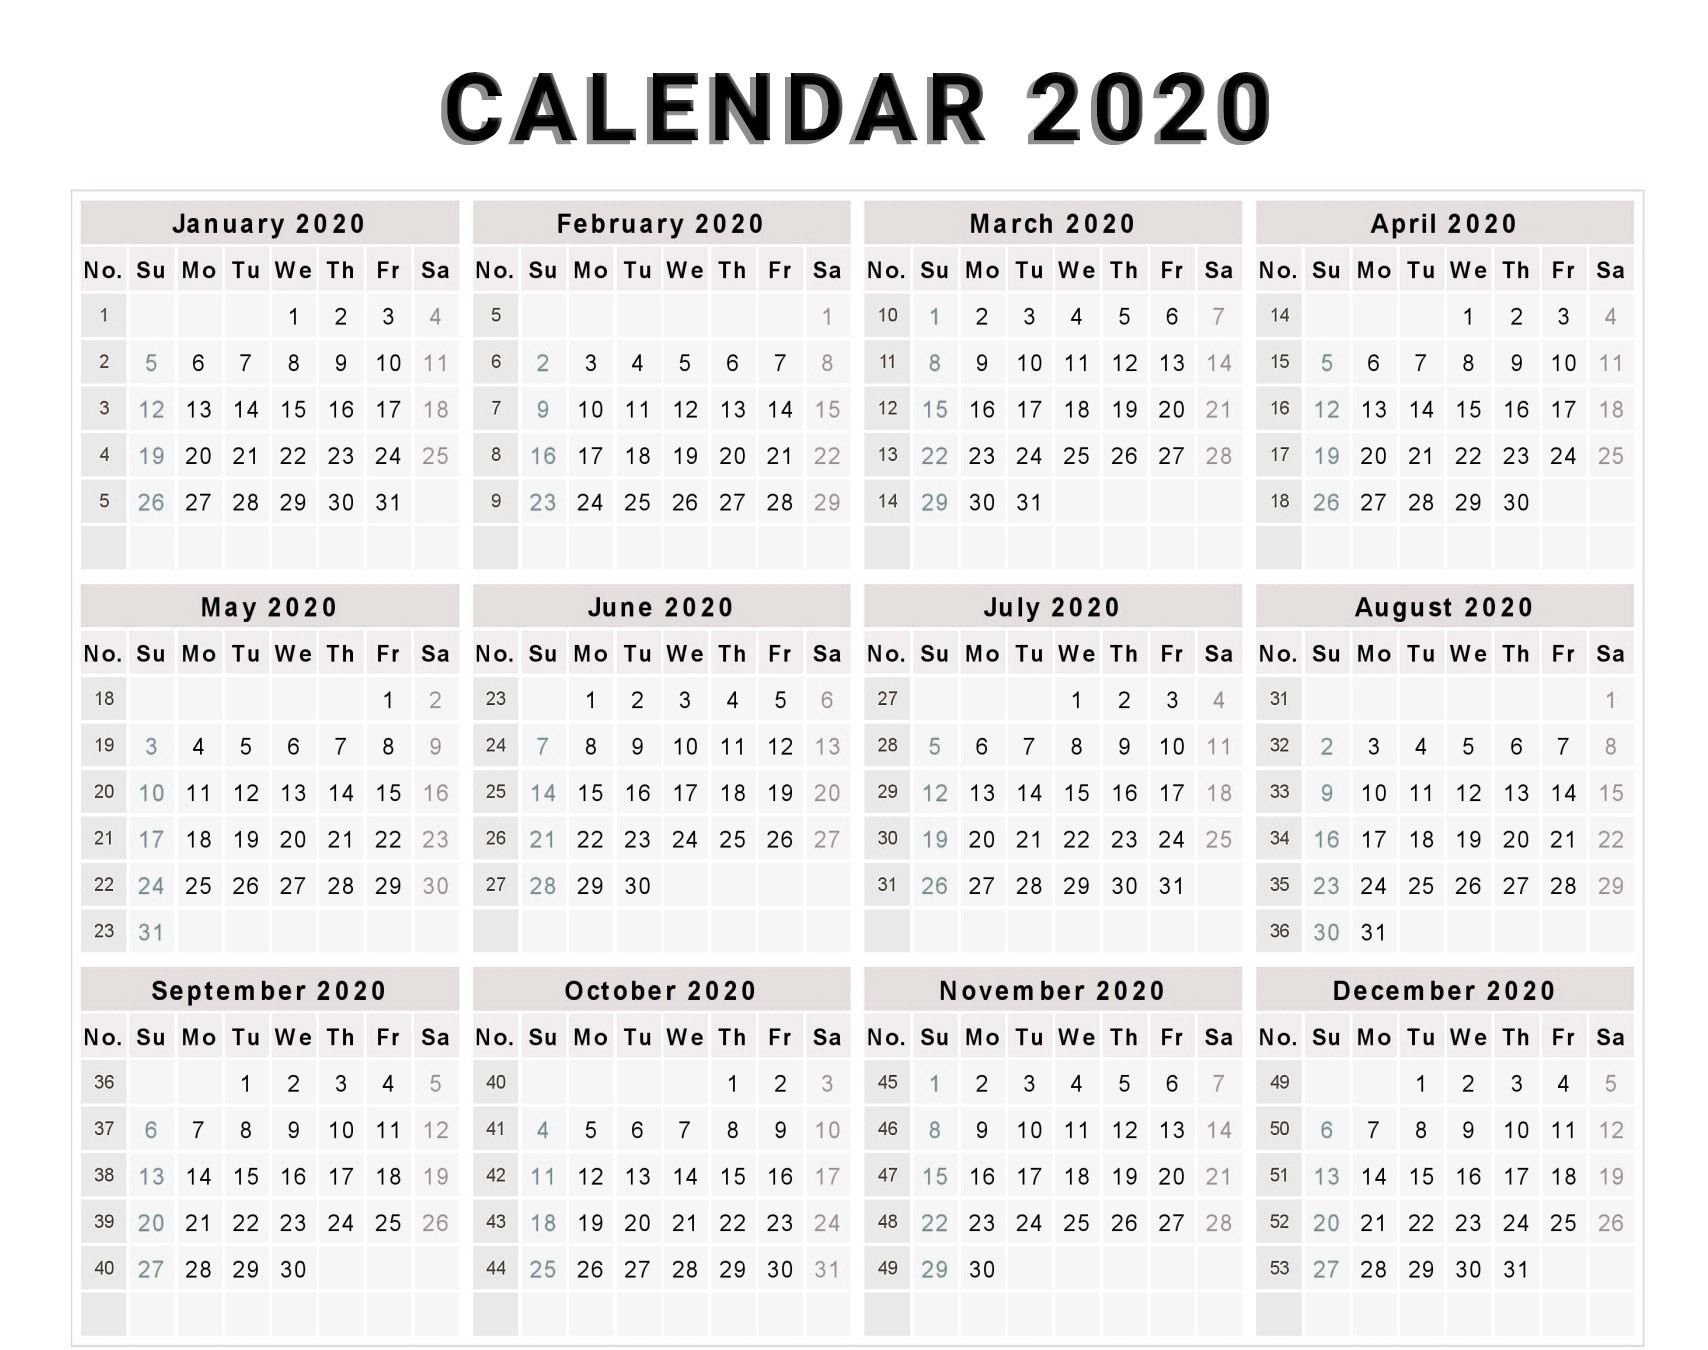 Calendar 2020 Free Template With Weeks | Free Calendar 2020 Calender With Numbered Days